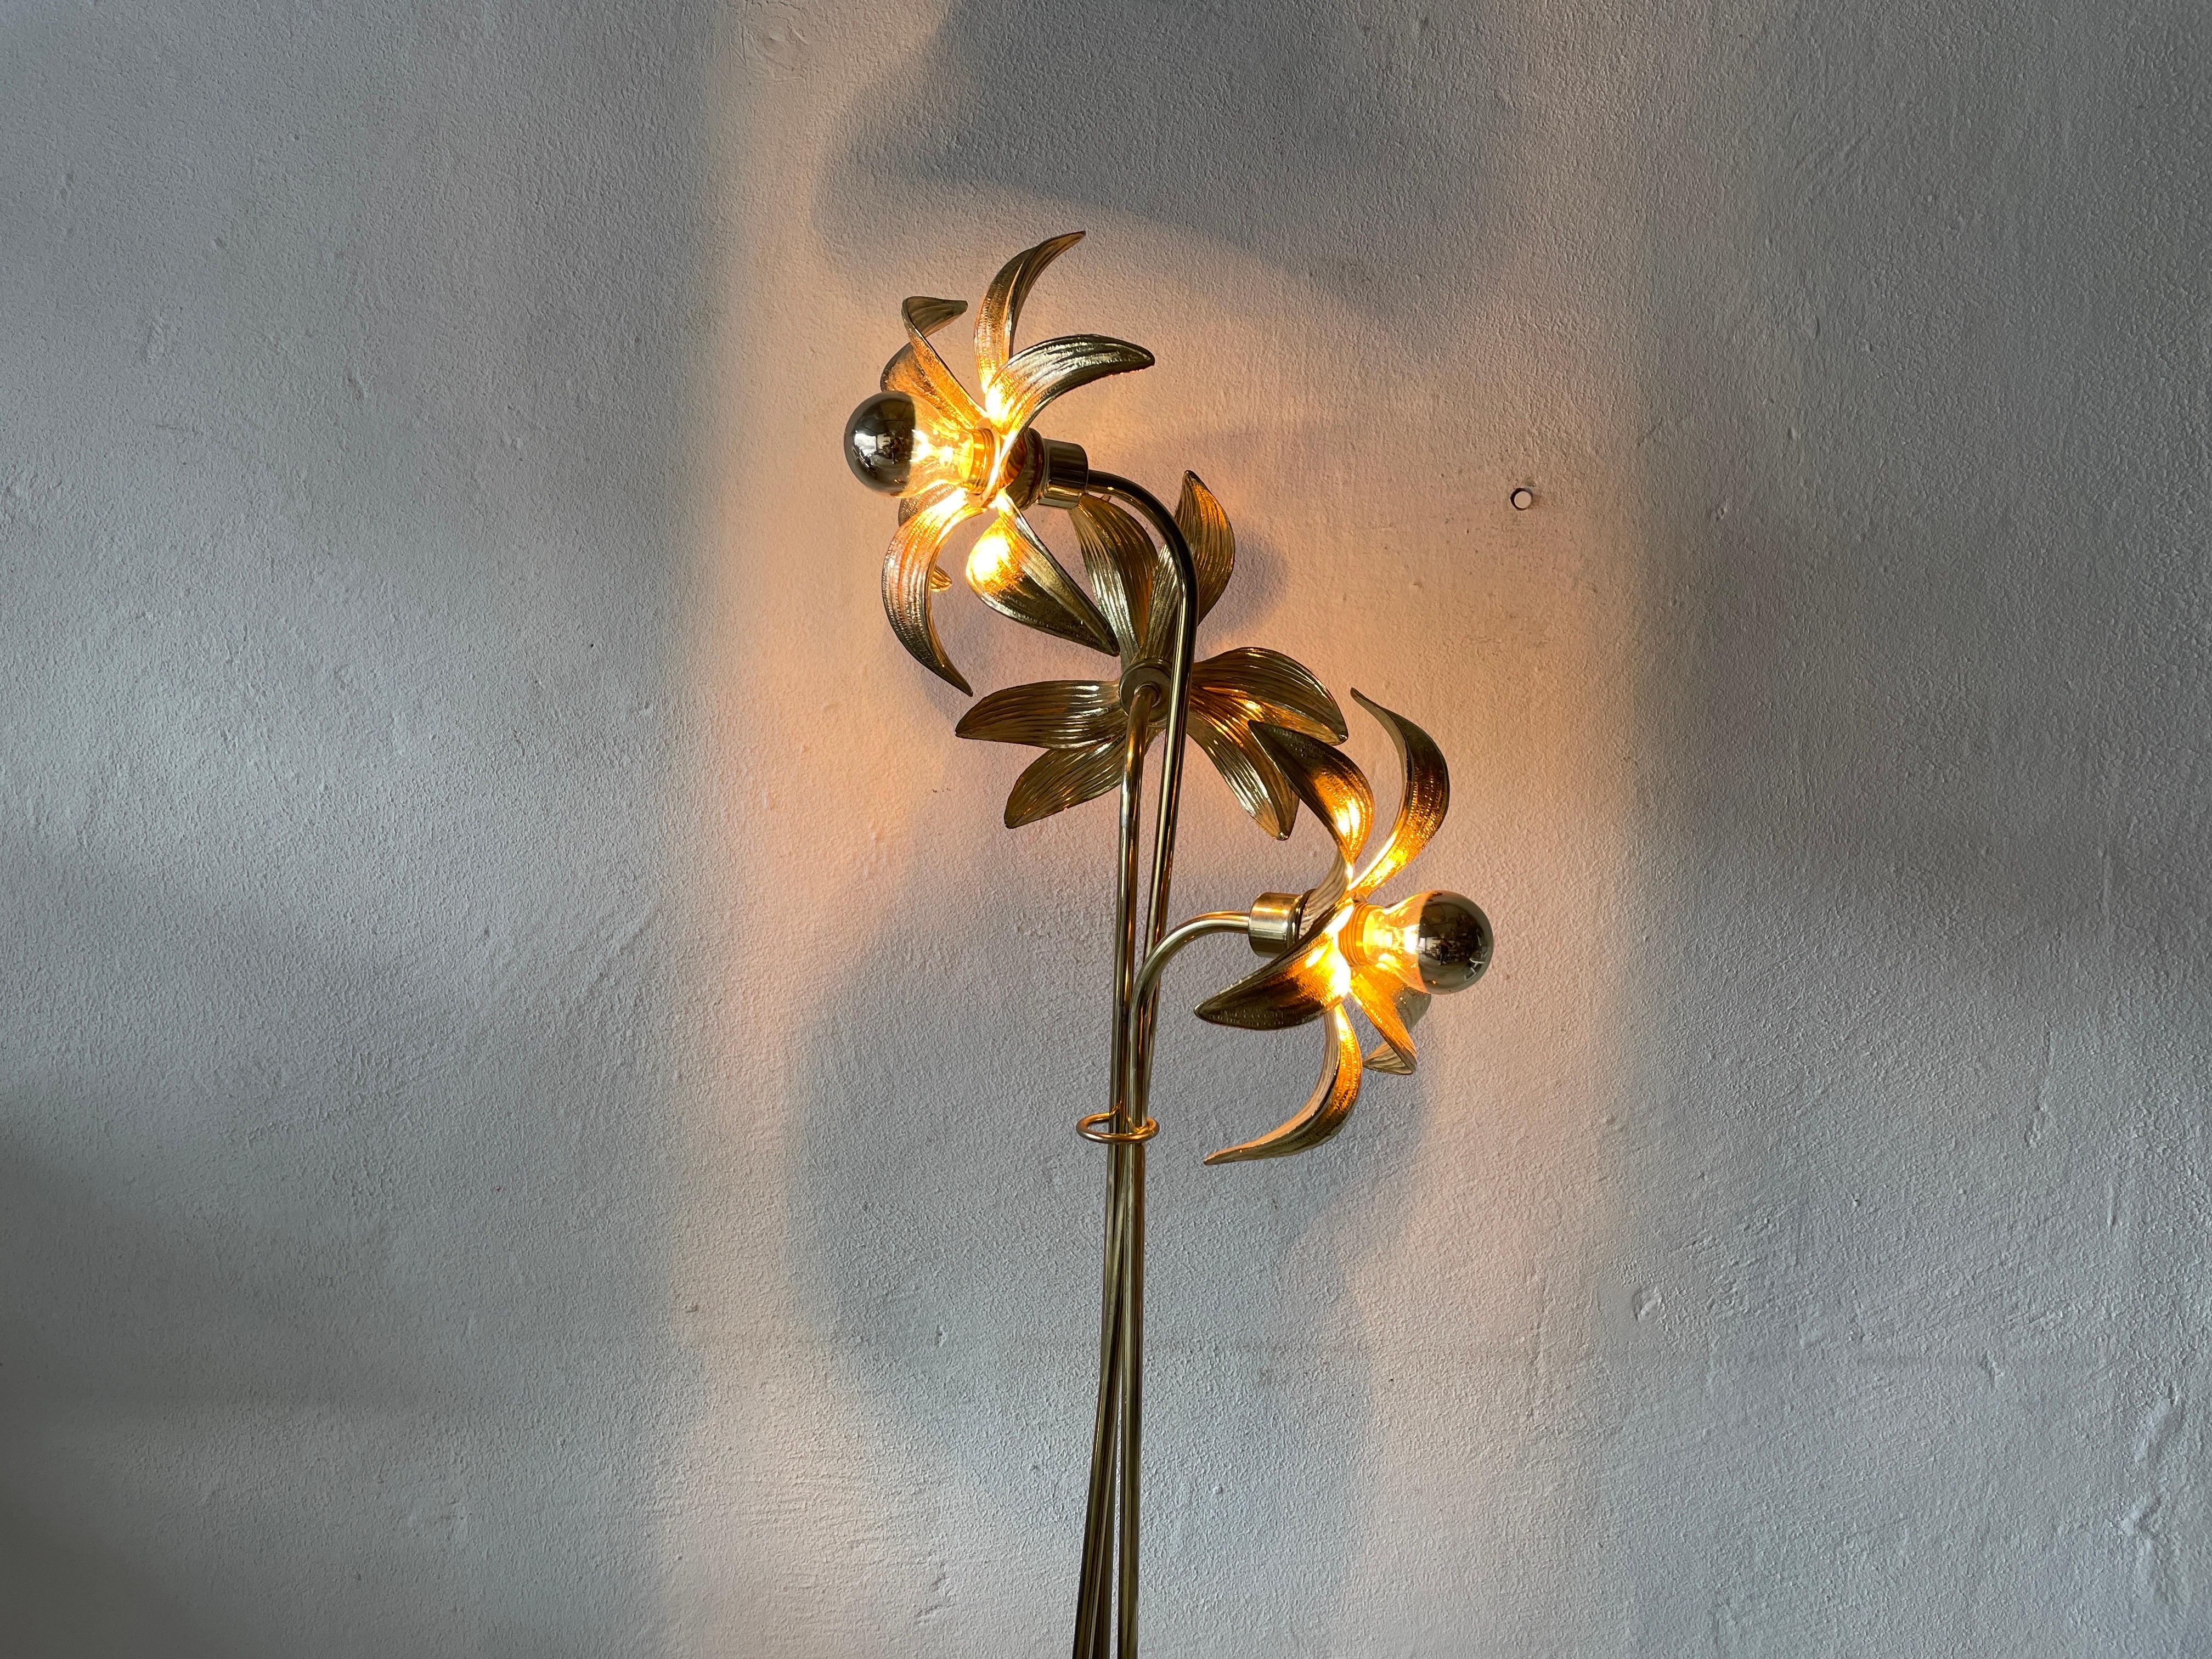 Triple Flower Shade Brass Floor Lamp by Willy Daro for Massive, 1970s, Germany For Sale 9